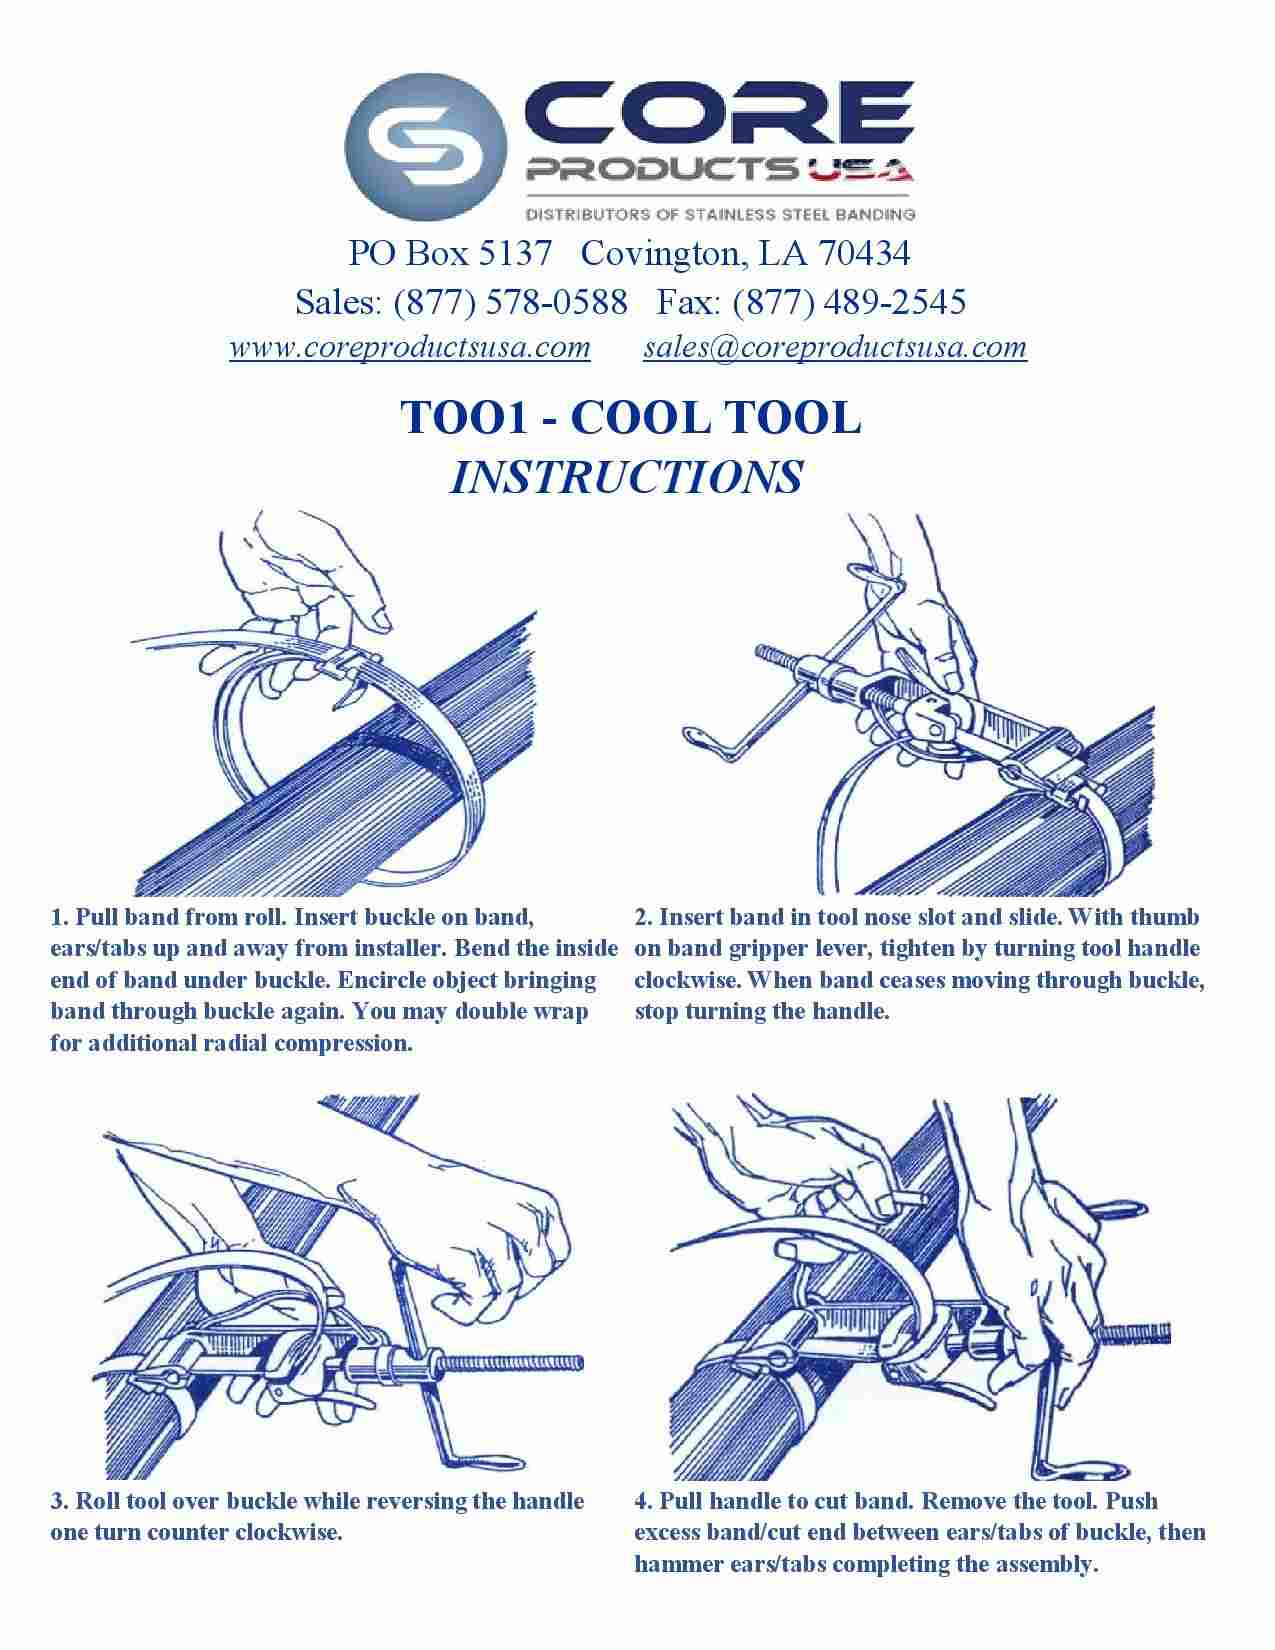 The Cool Tool - #T001